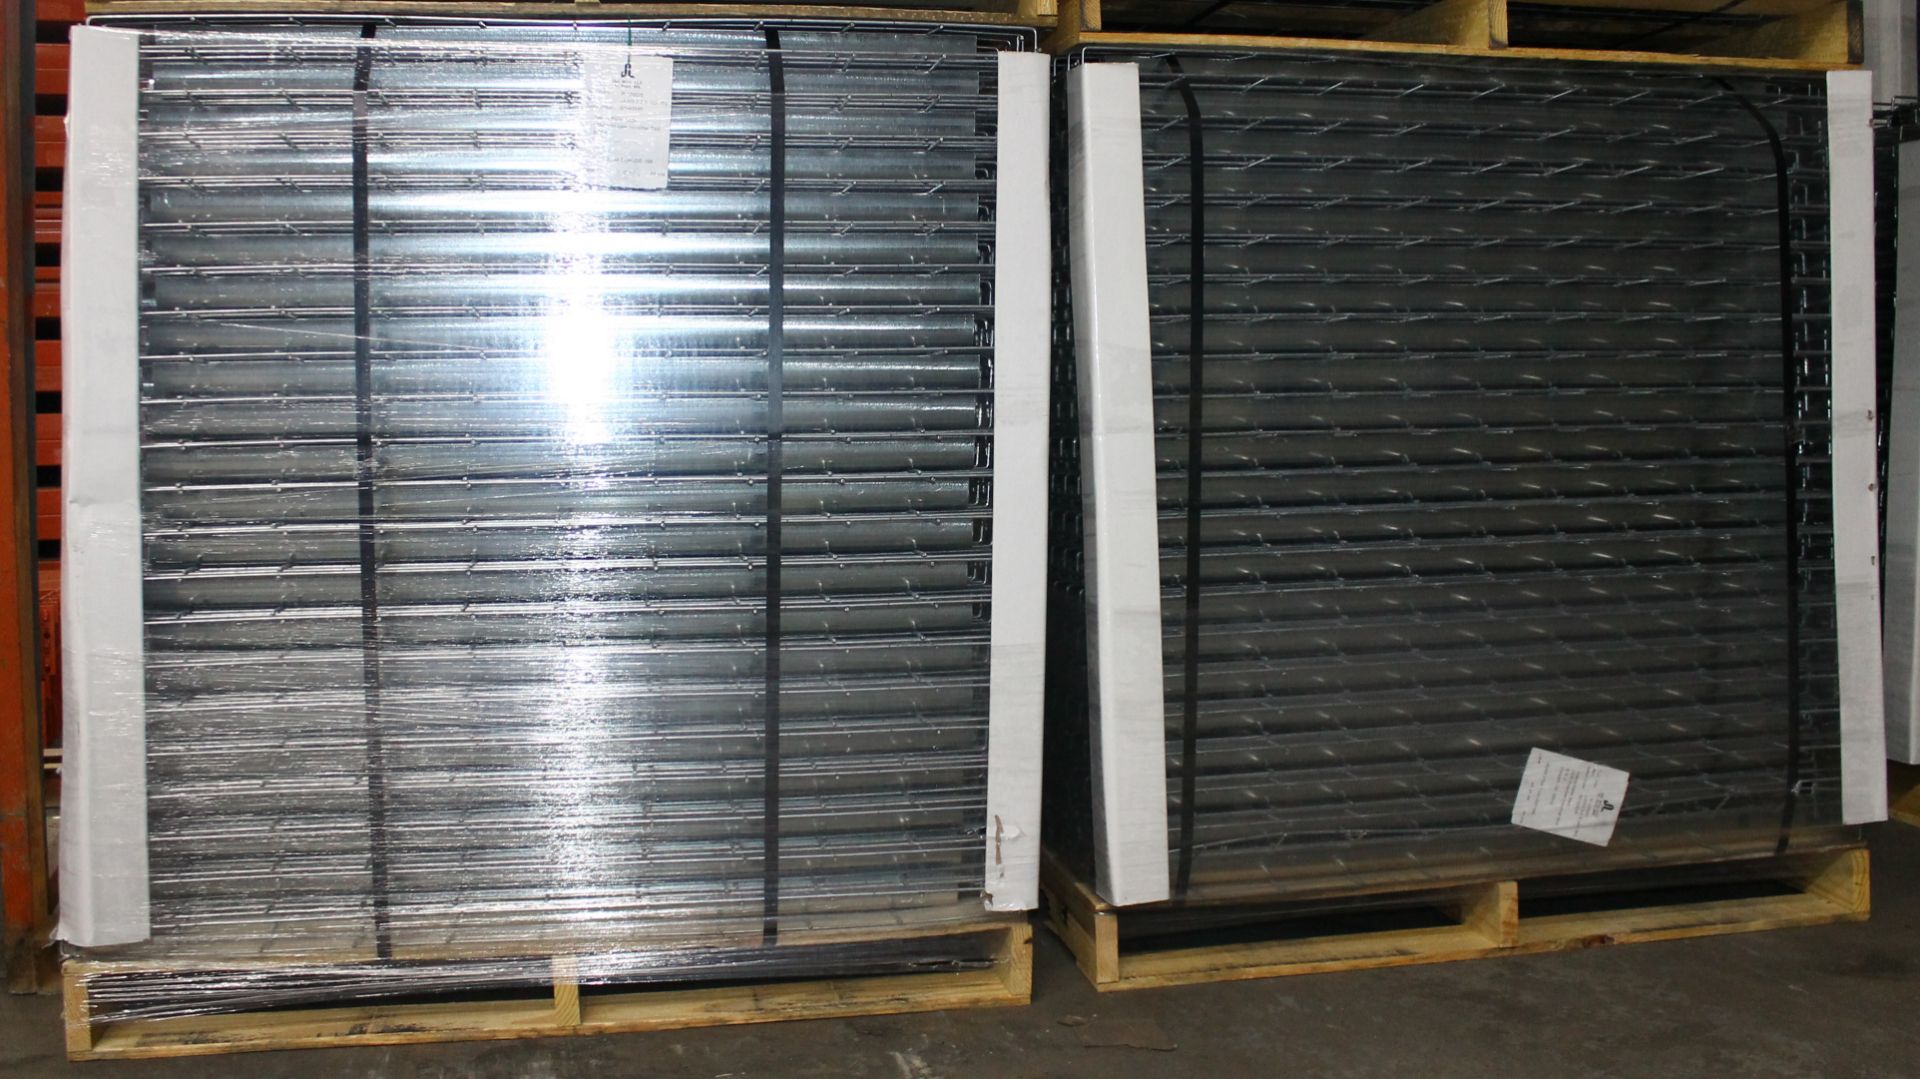 NEW 40 PCS OF STANDARD 42" X 52" WIREDECK - 2250 LBS CAPACITY